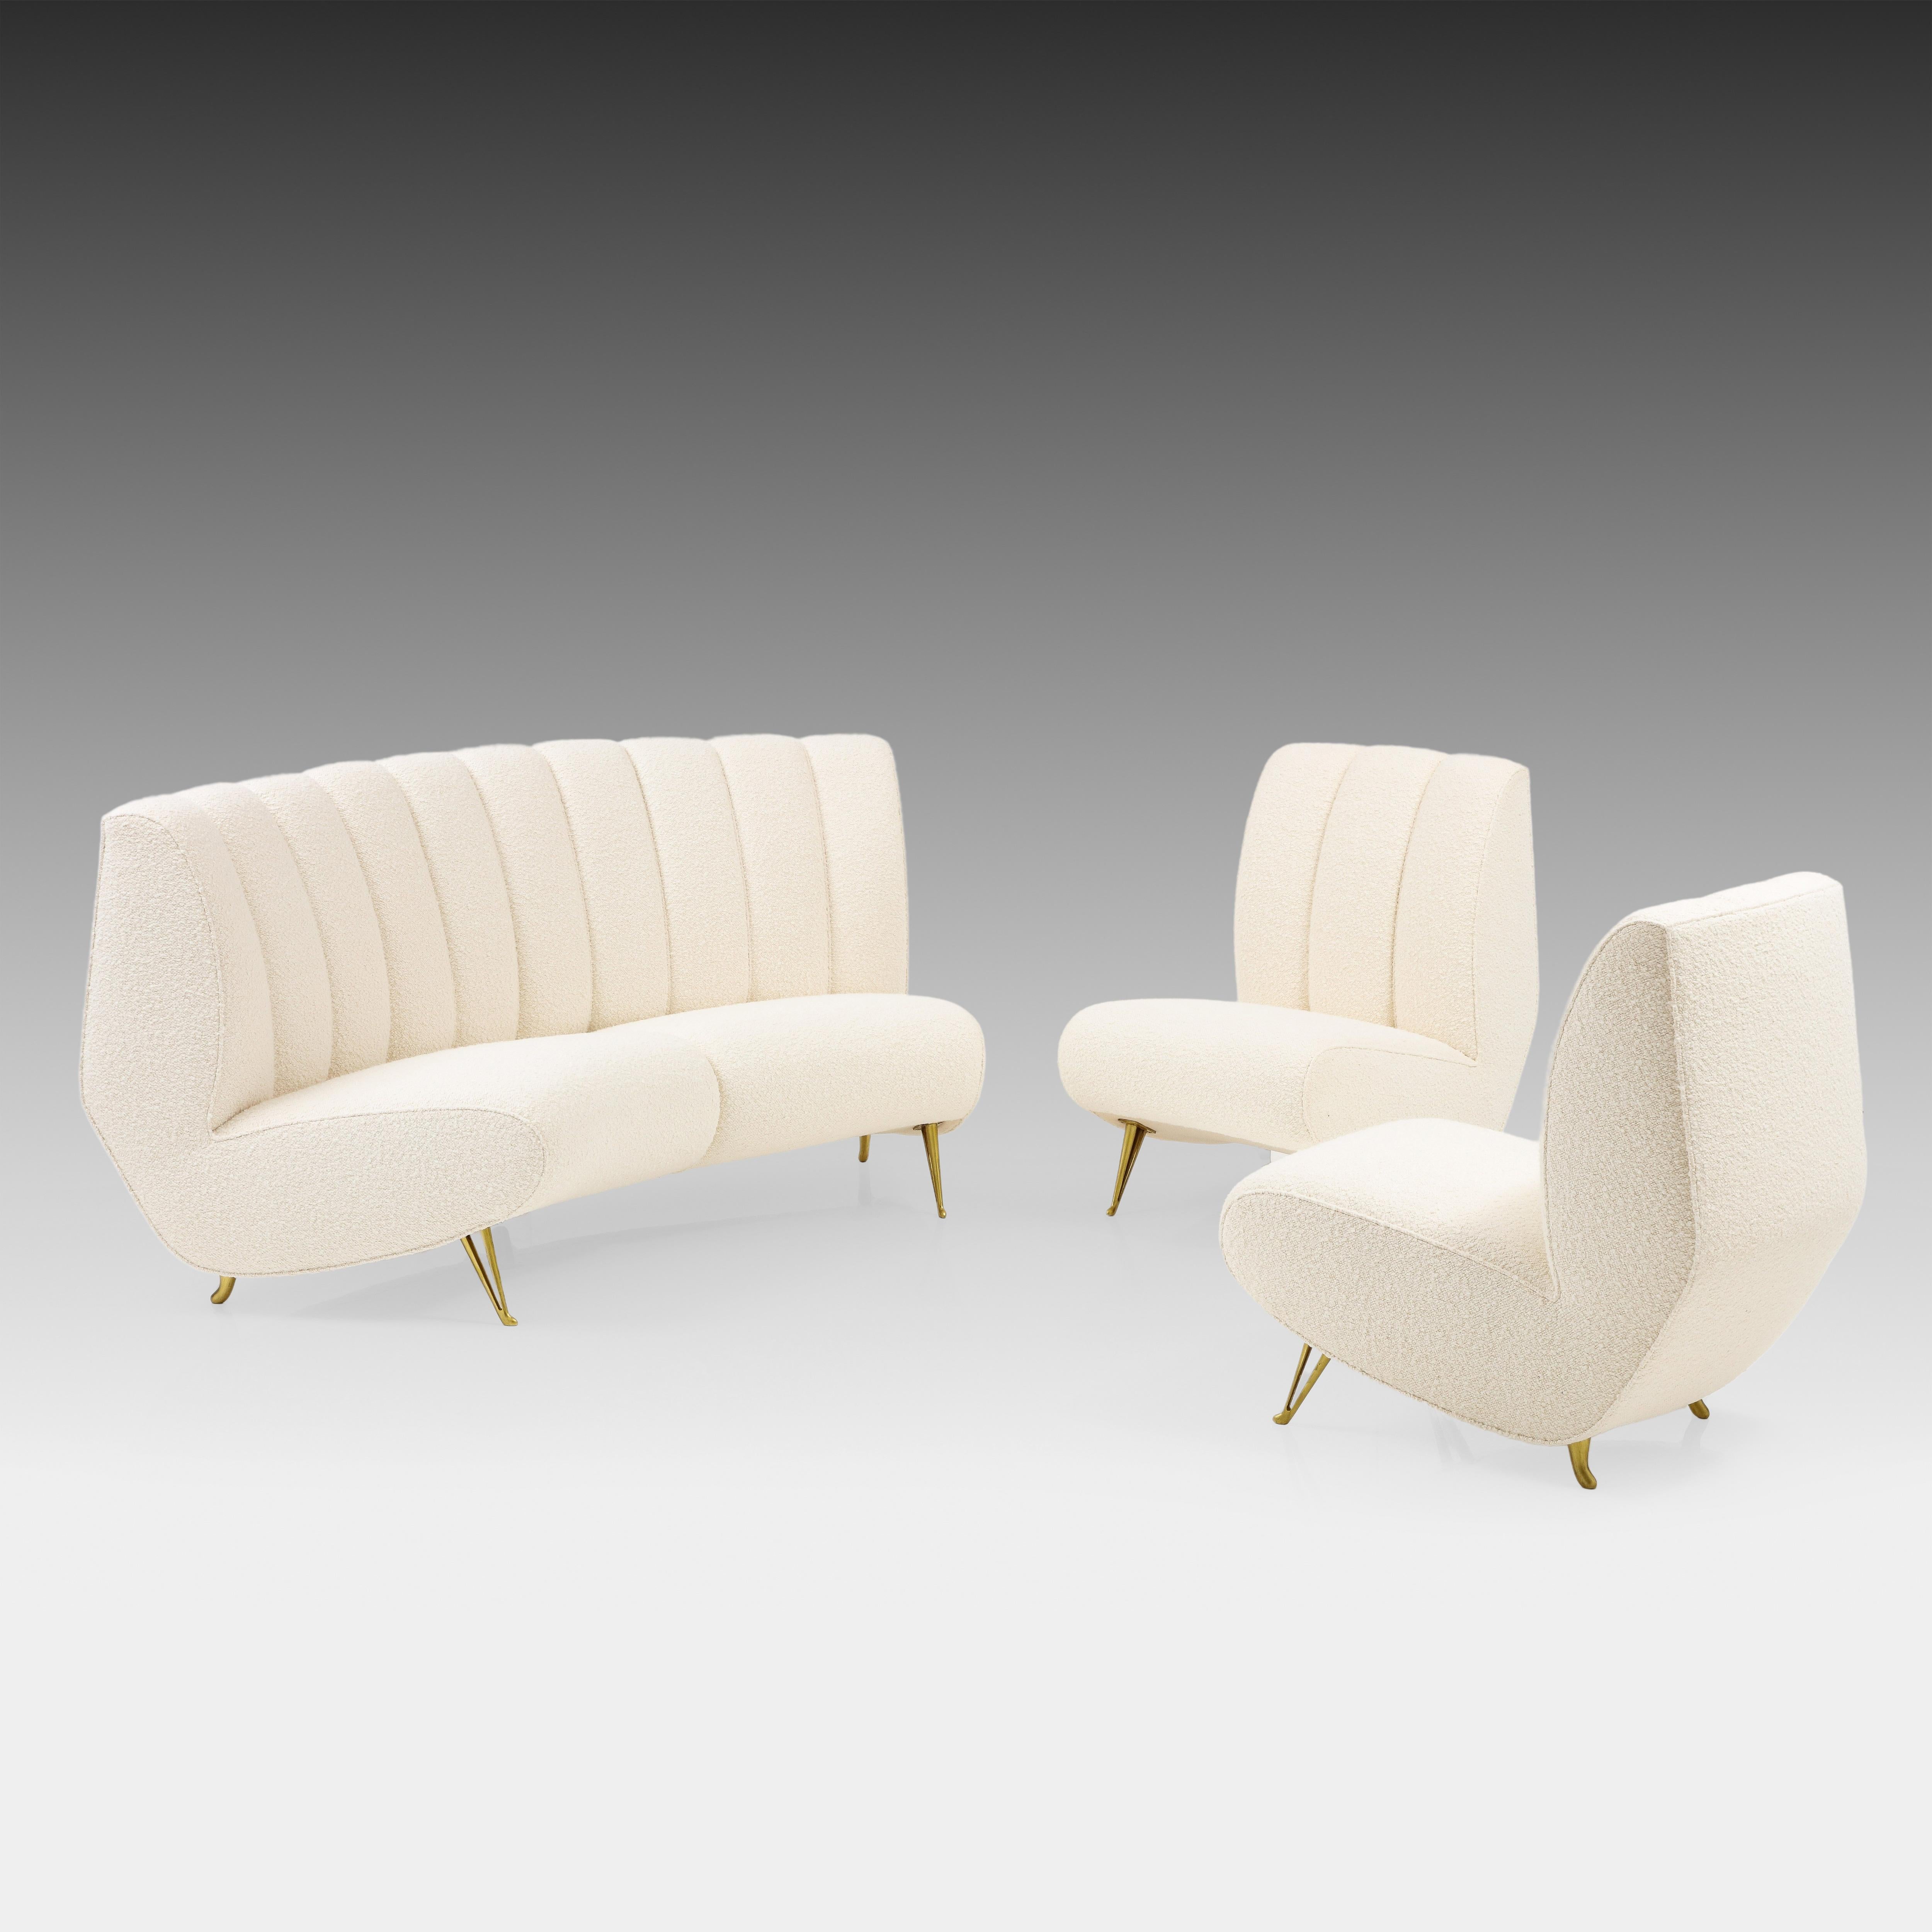 ISA Bergamo Rare Pair of Lounge or Slipper Chairs in Ivory Bouclé, Italy, 1950s For Sale 5